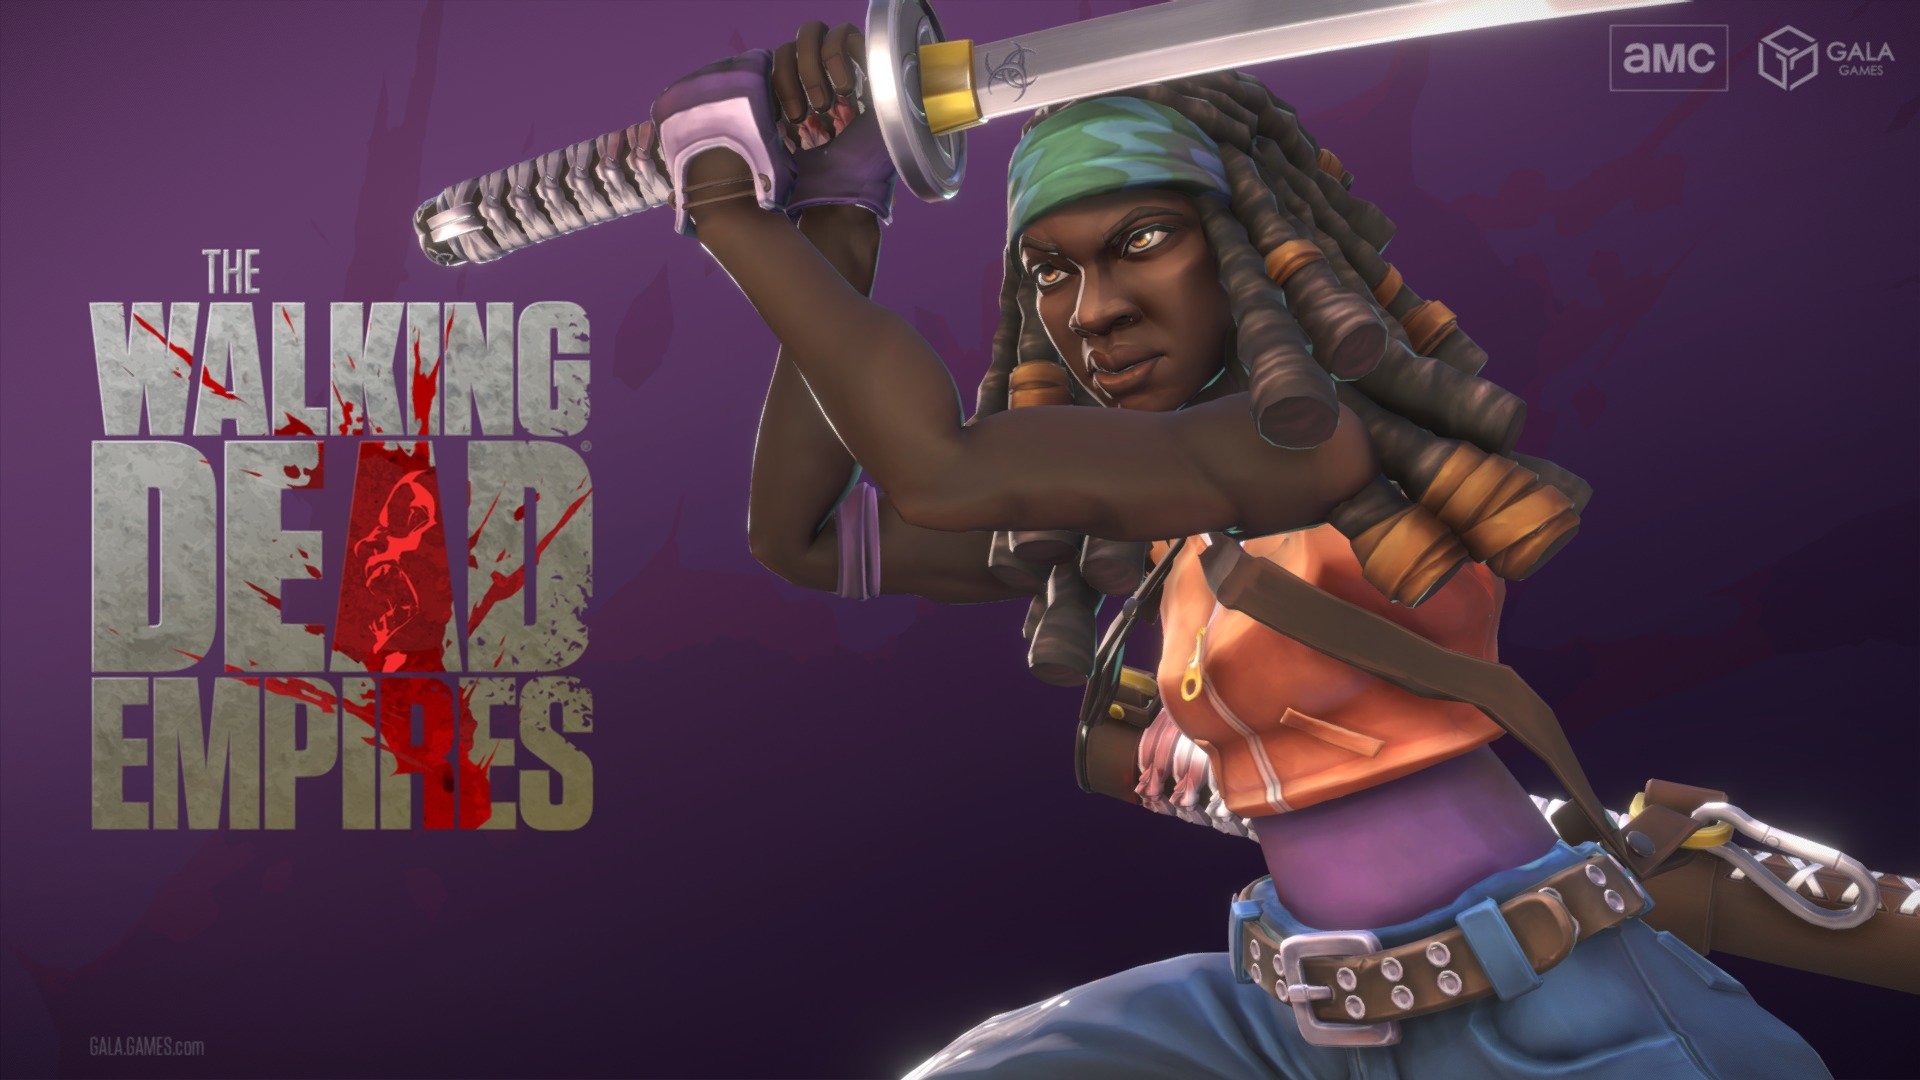 Come and play in the world of the Walking Dead Empires! A new MMO from Gala Games. Get your NFT’s while supplies last, or just join in on the carnage and build your empire. (Free to play). Fan favorite Michonne has her Katana ready!!!

Pre Alpha beta coming soon, check out info at - gala.games - The Walking Dead Empires: Michonne - 3D model by emberk2 3d model